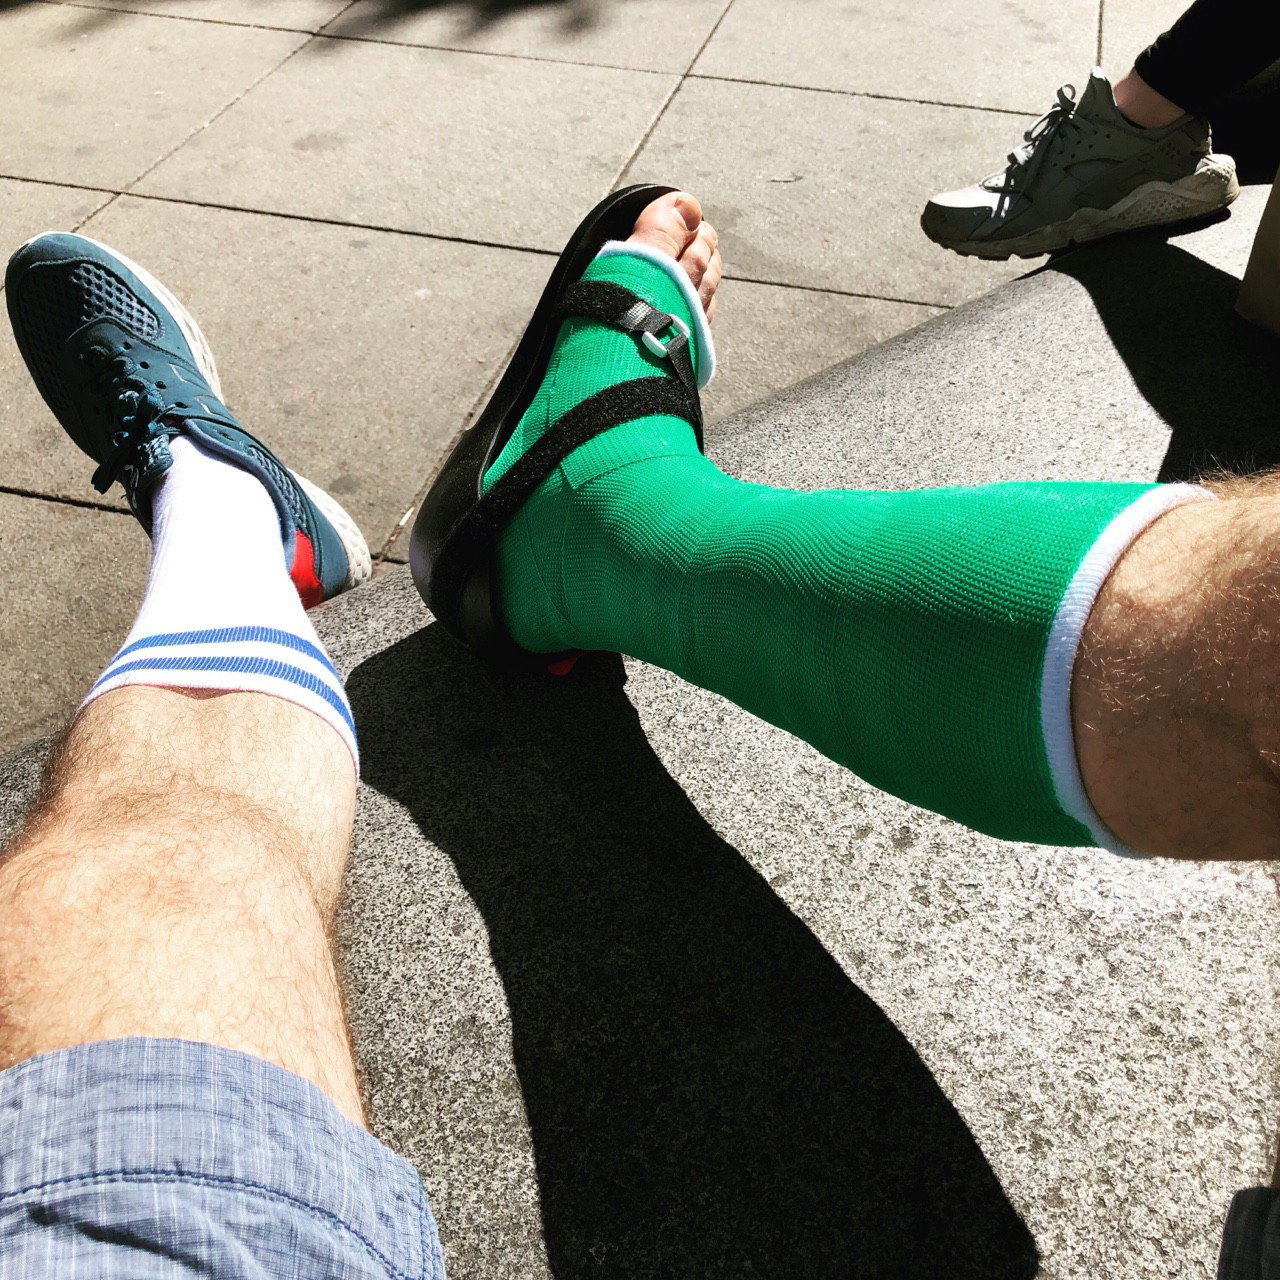 Photo by ampstef with the username @ampstef,  June 29, 2018 at 8:50 PM and the text says 'castmande:

Waiting in the sun #brokenleg #brokenfoot #brokenankle #gayfetish #gaysneakers'